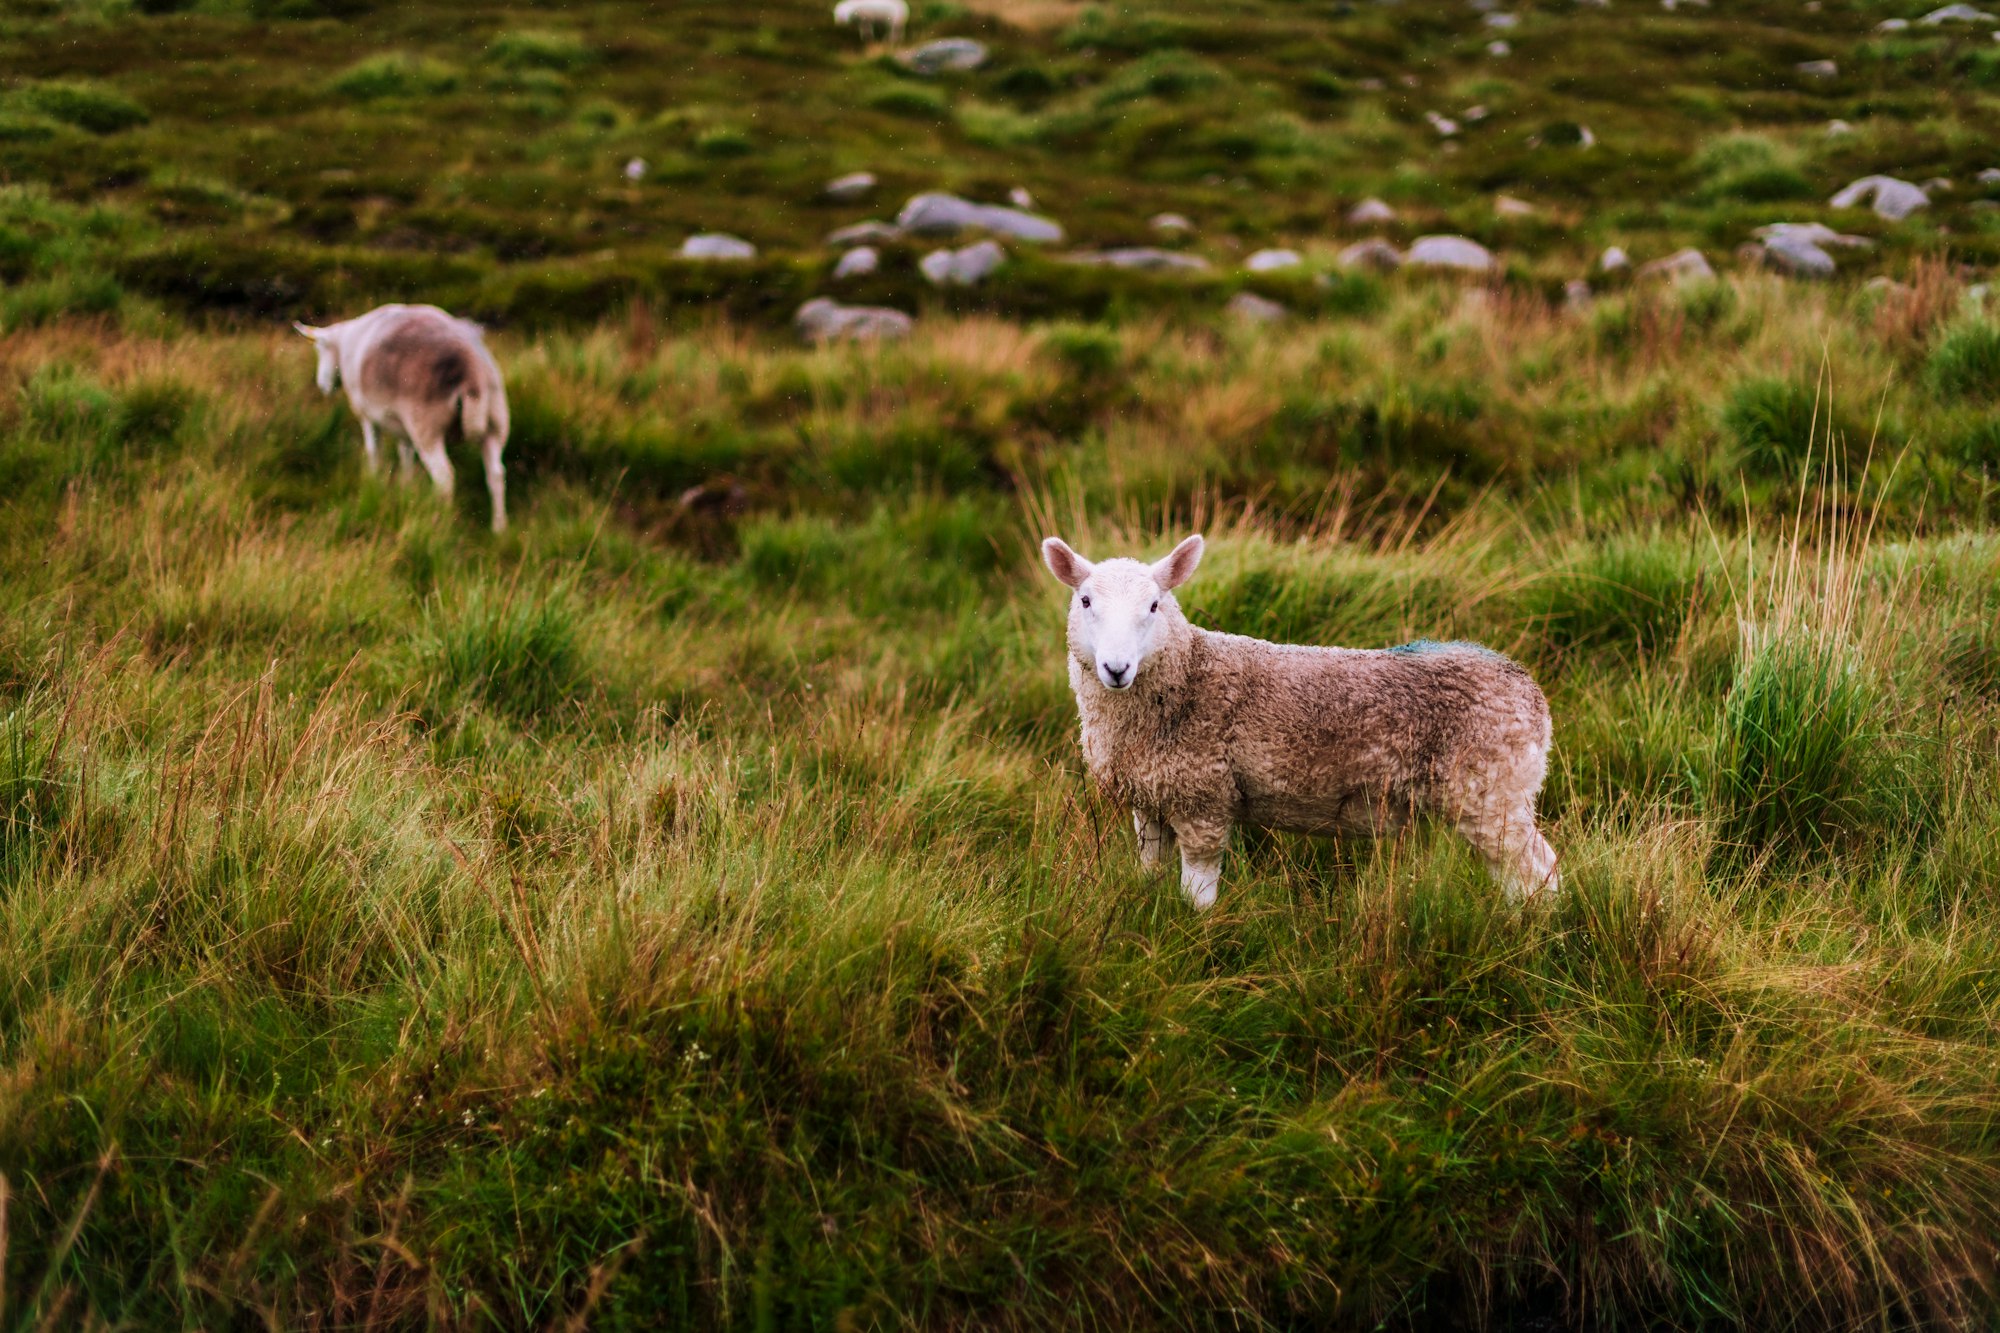 A sassy sheep in the Wicklow mountains, Ireland.